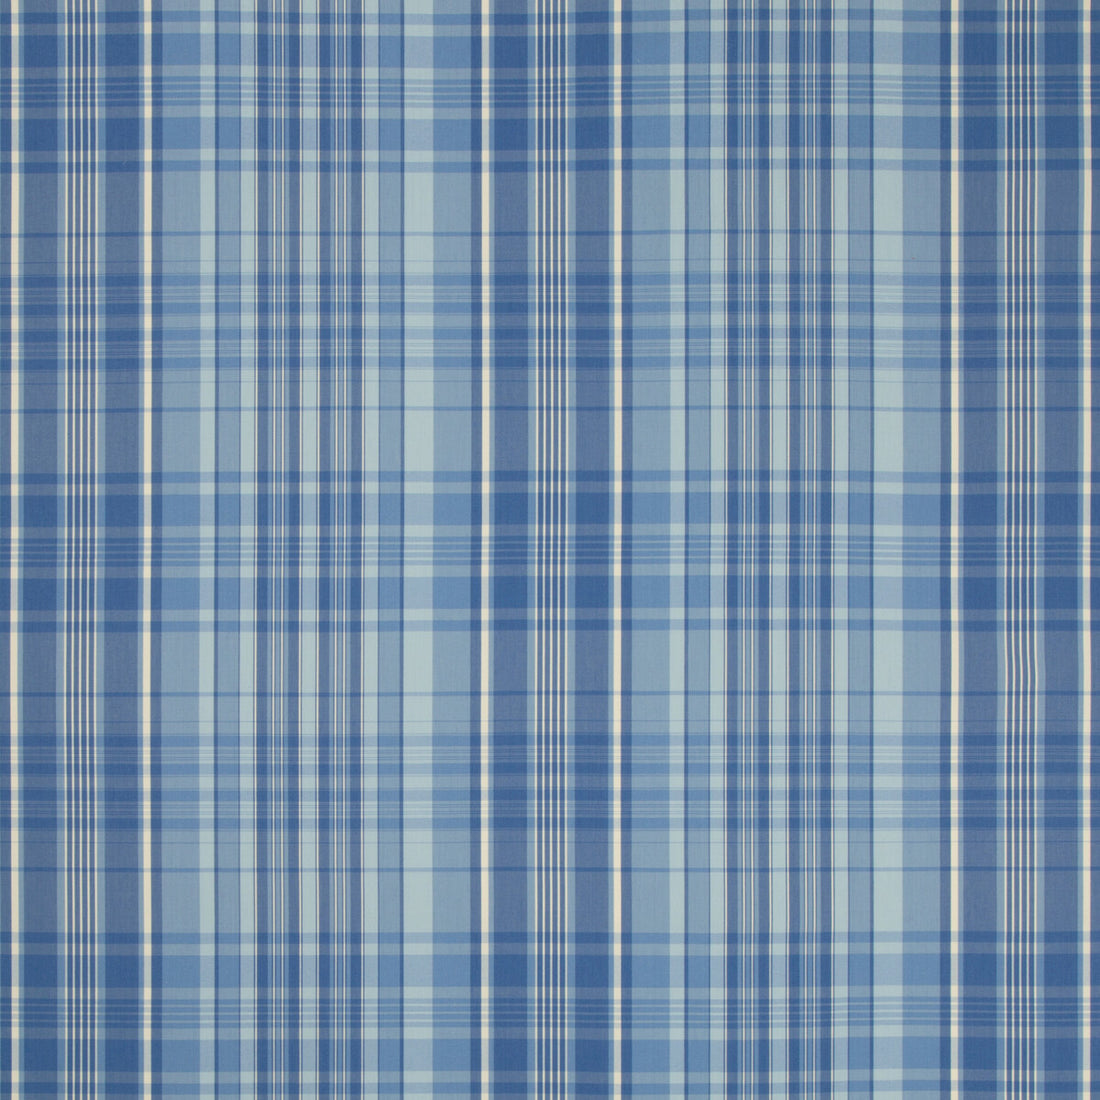 Guernsey Check fabric in blue color - pattern 8019101.5.0 - by Brunschwig &amp; Fils in the Normant Checks And Stripes collection